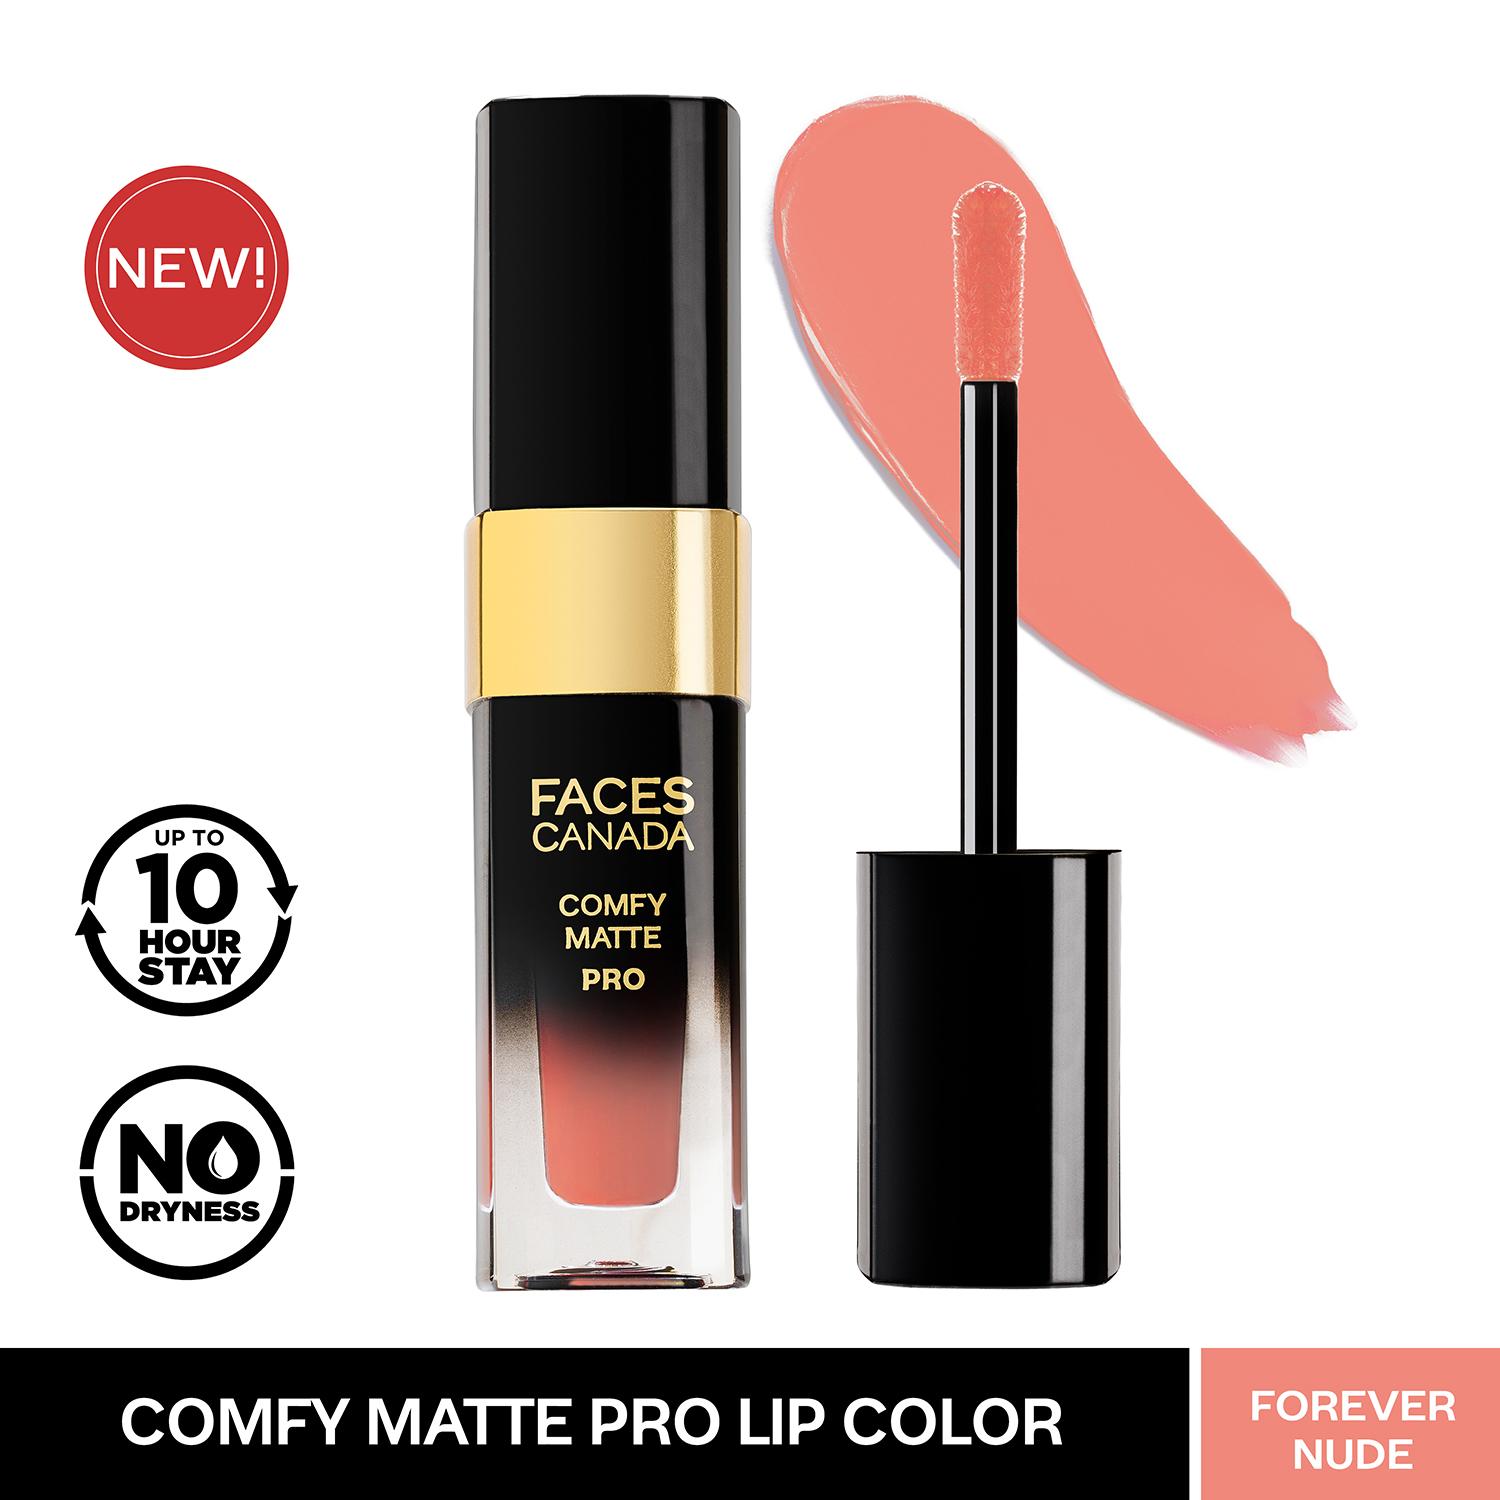 Faces Canada | Faces Canada Comfy Matte Pro Liquid Lipstick - Forever Nude 09, 10HR Stay, No Dryness (5.5 ml)